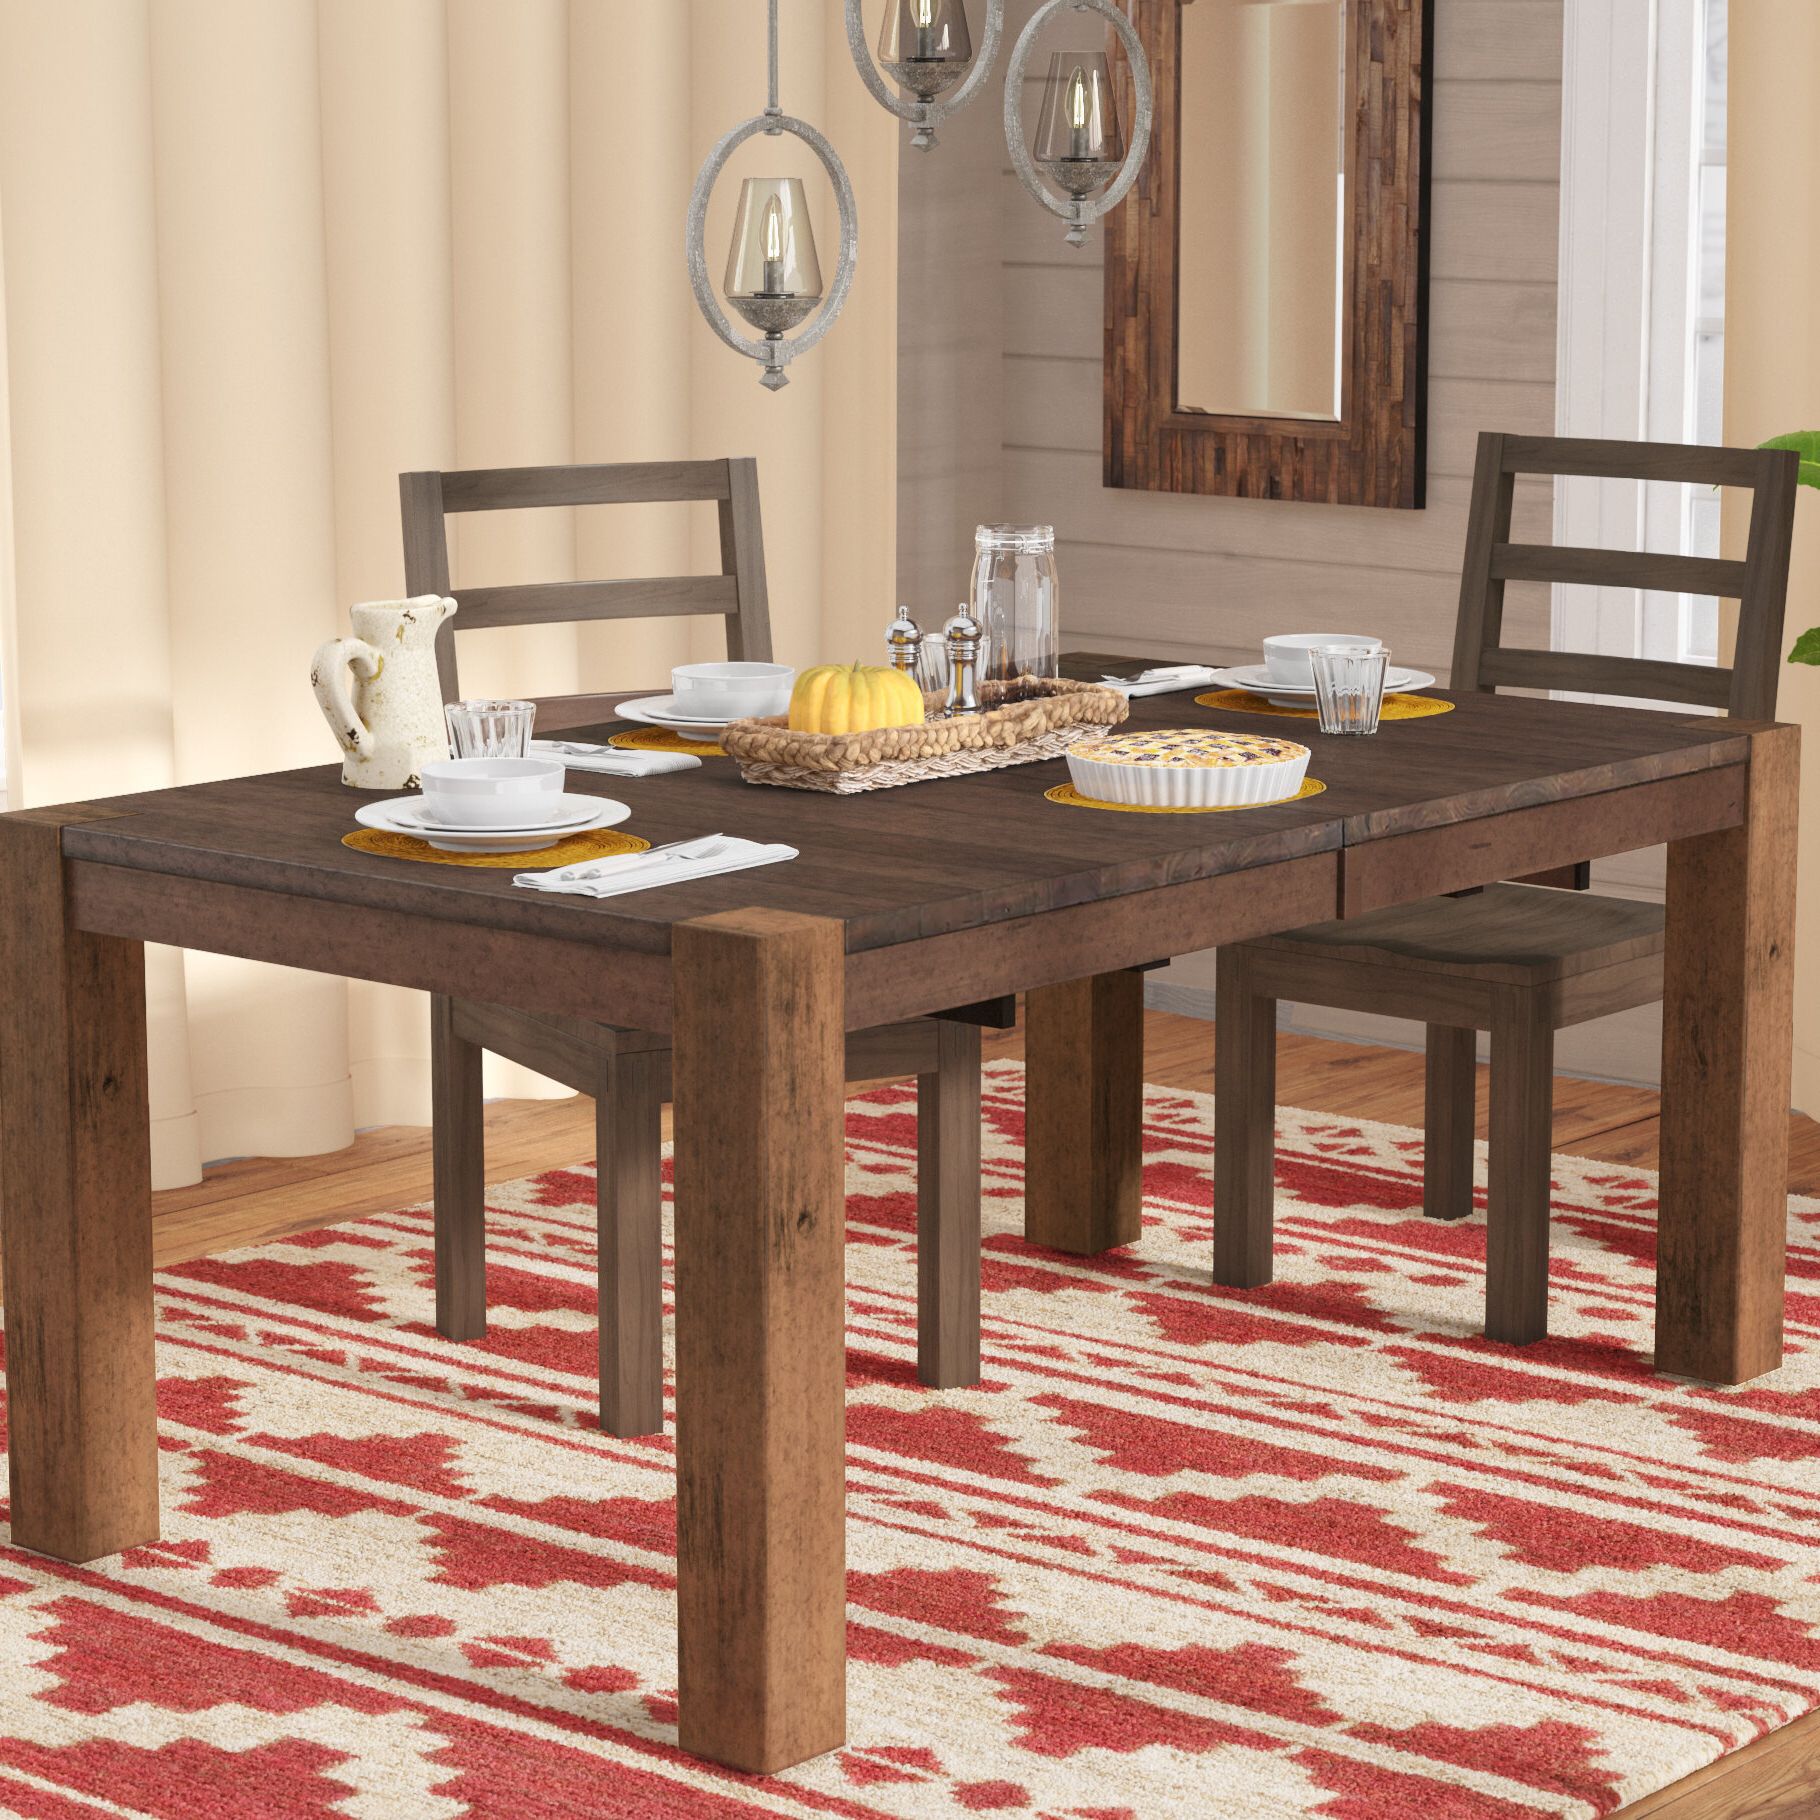 Trevion Leg Extendable Dining Table With Regard To 2019 Rustic Mahogany Extending Dining Tables (View 6 of 25)